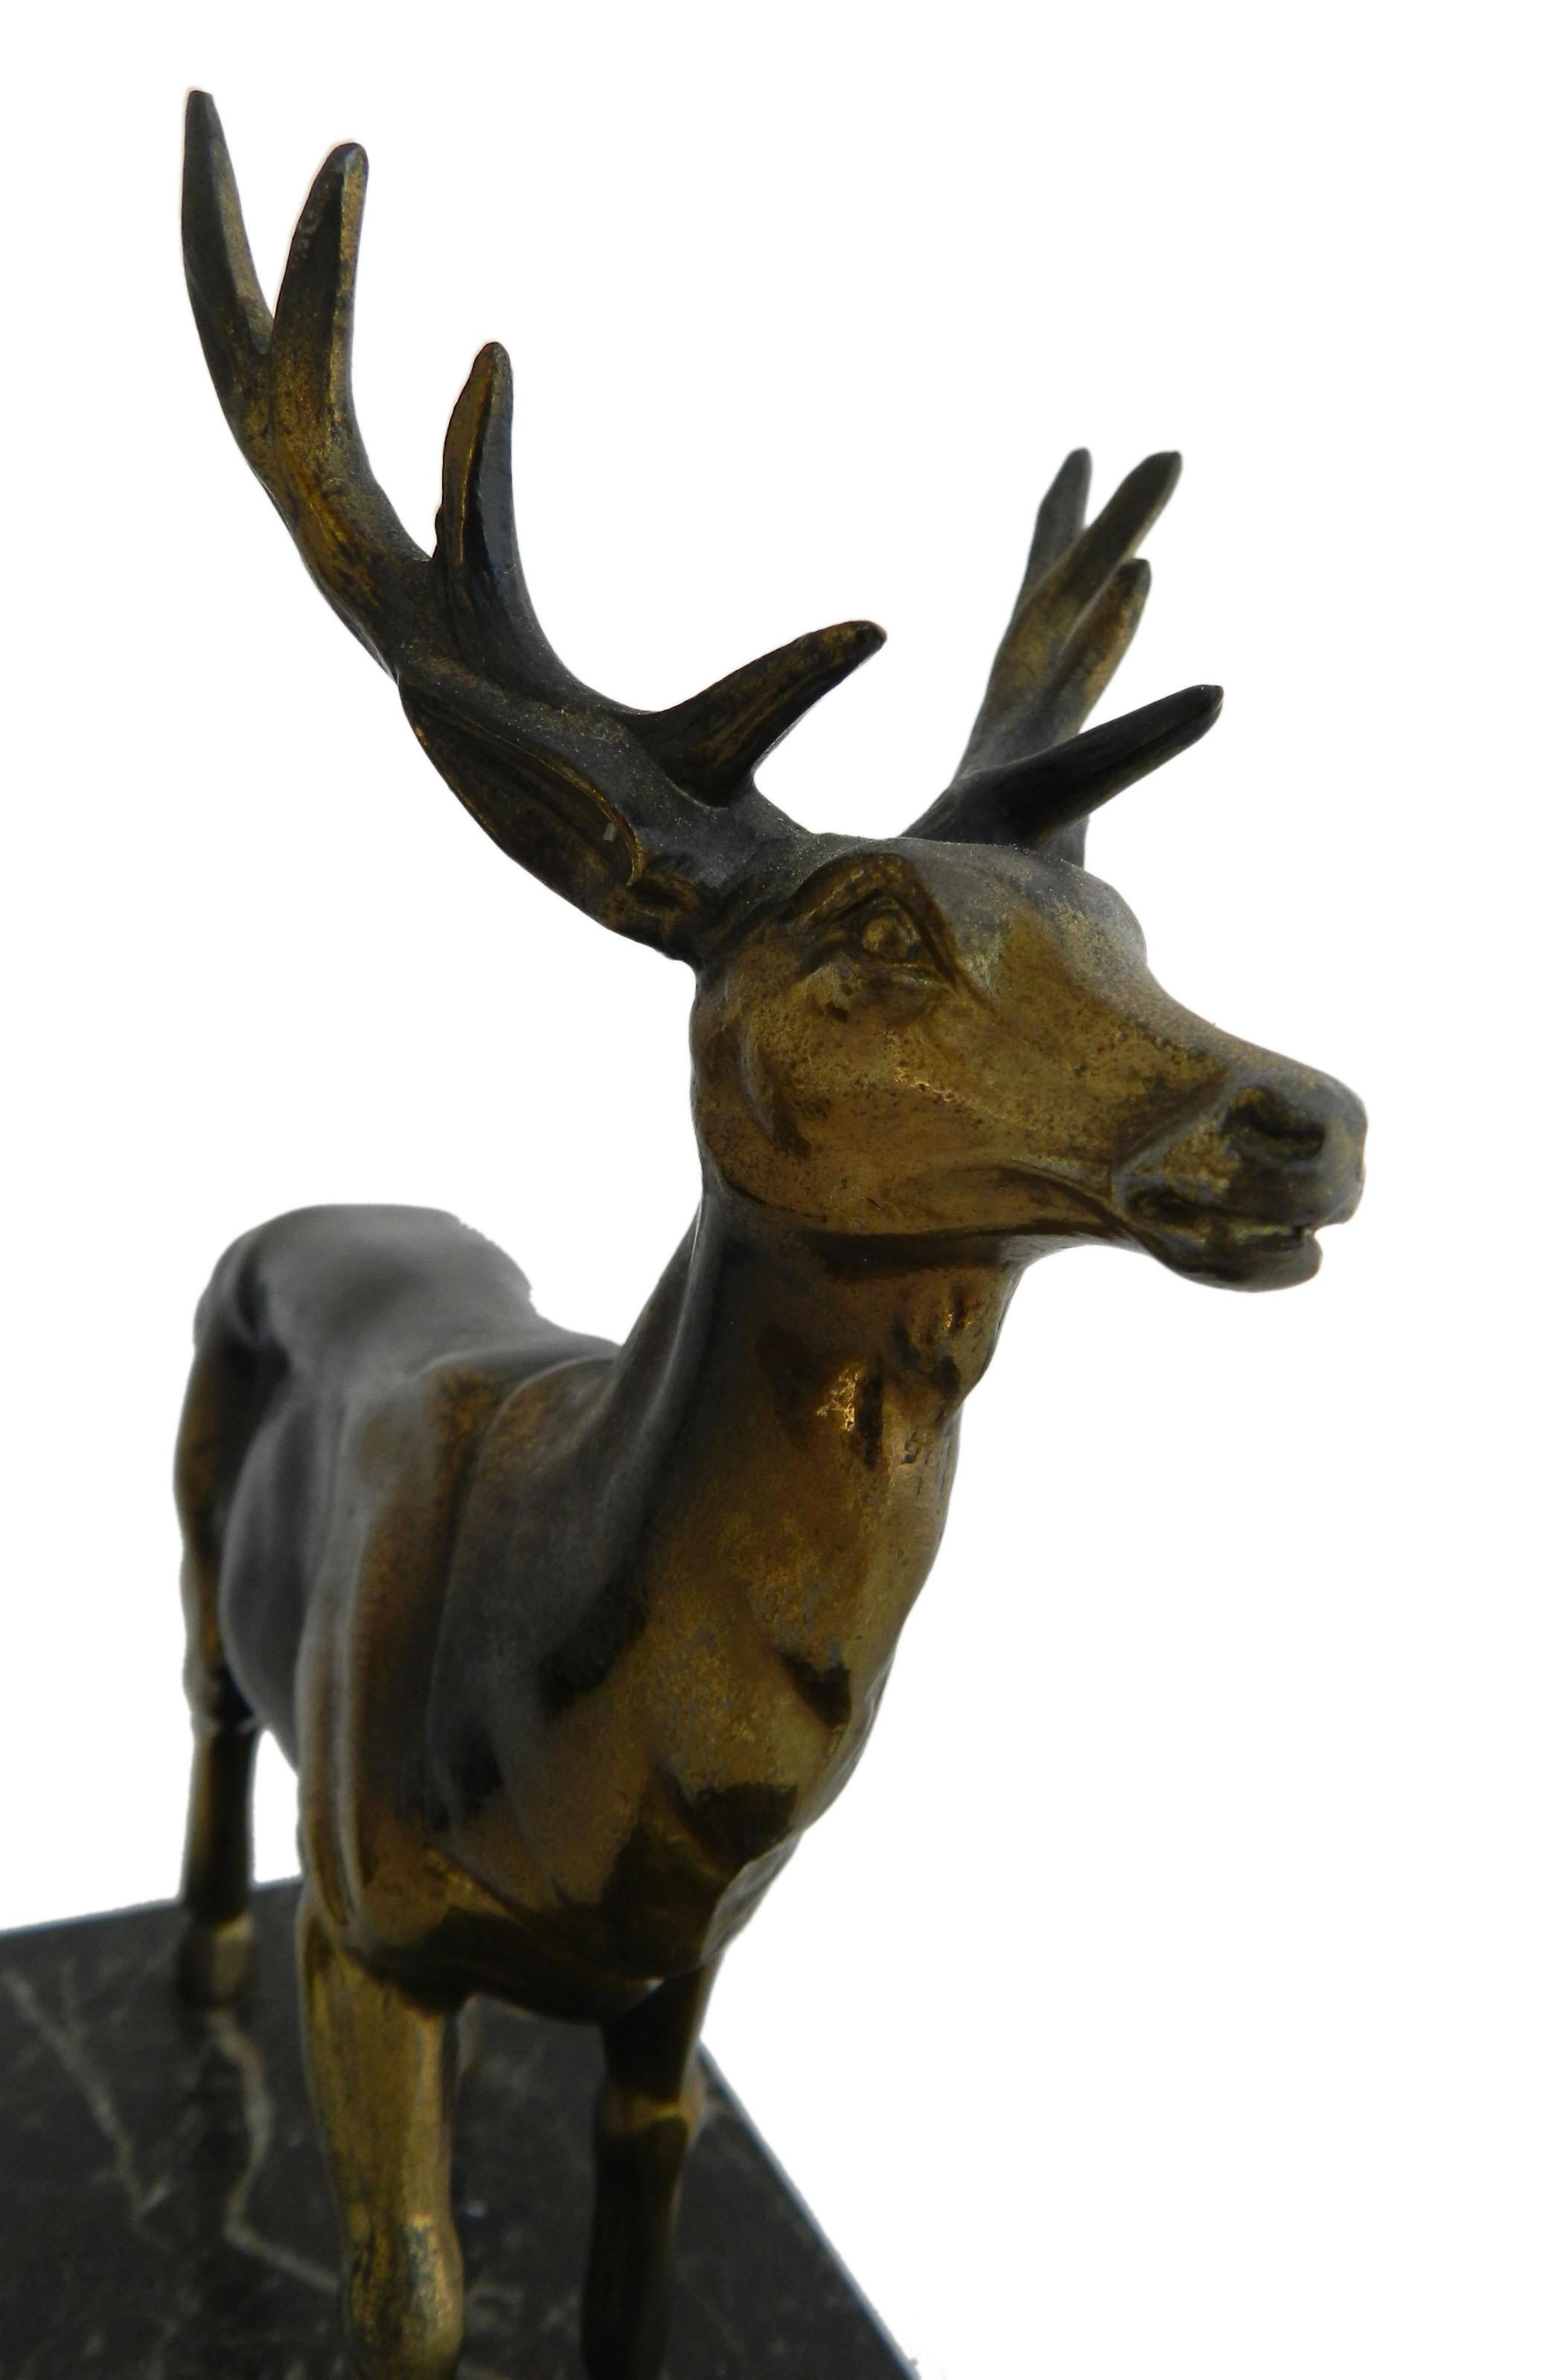 Pair of Deer Mid Century Stag and Deer
French Mid Century
Marble base
Bronze
Good vintage condition with minor signs of age.




 